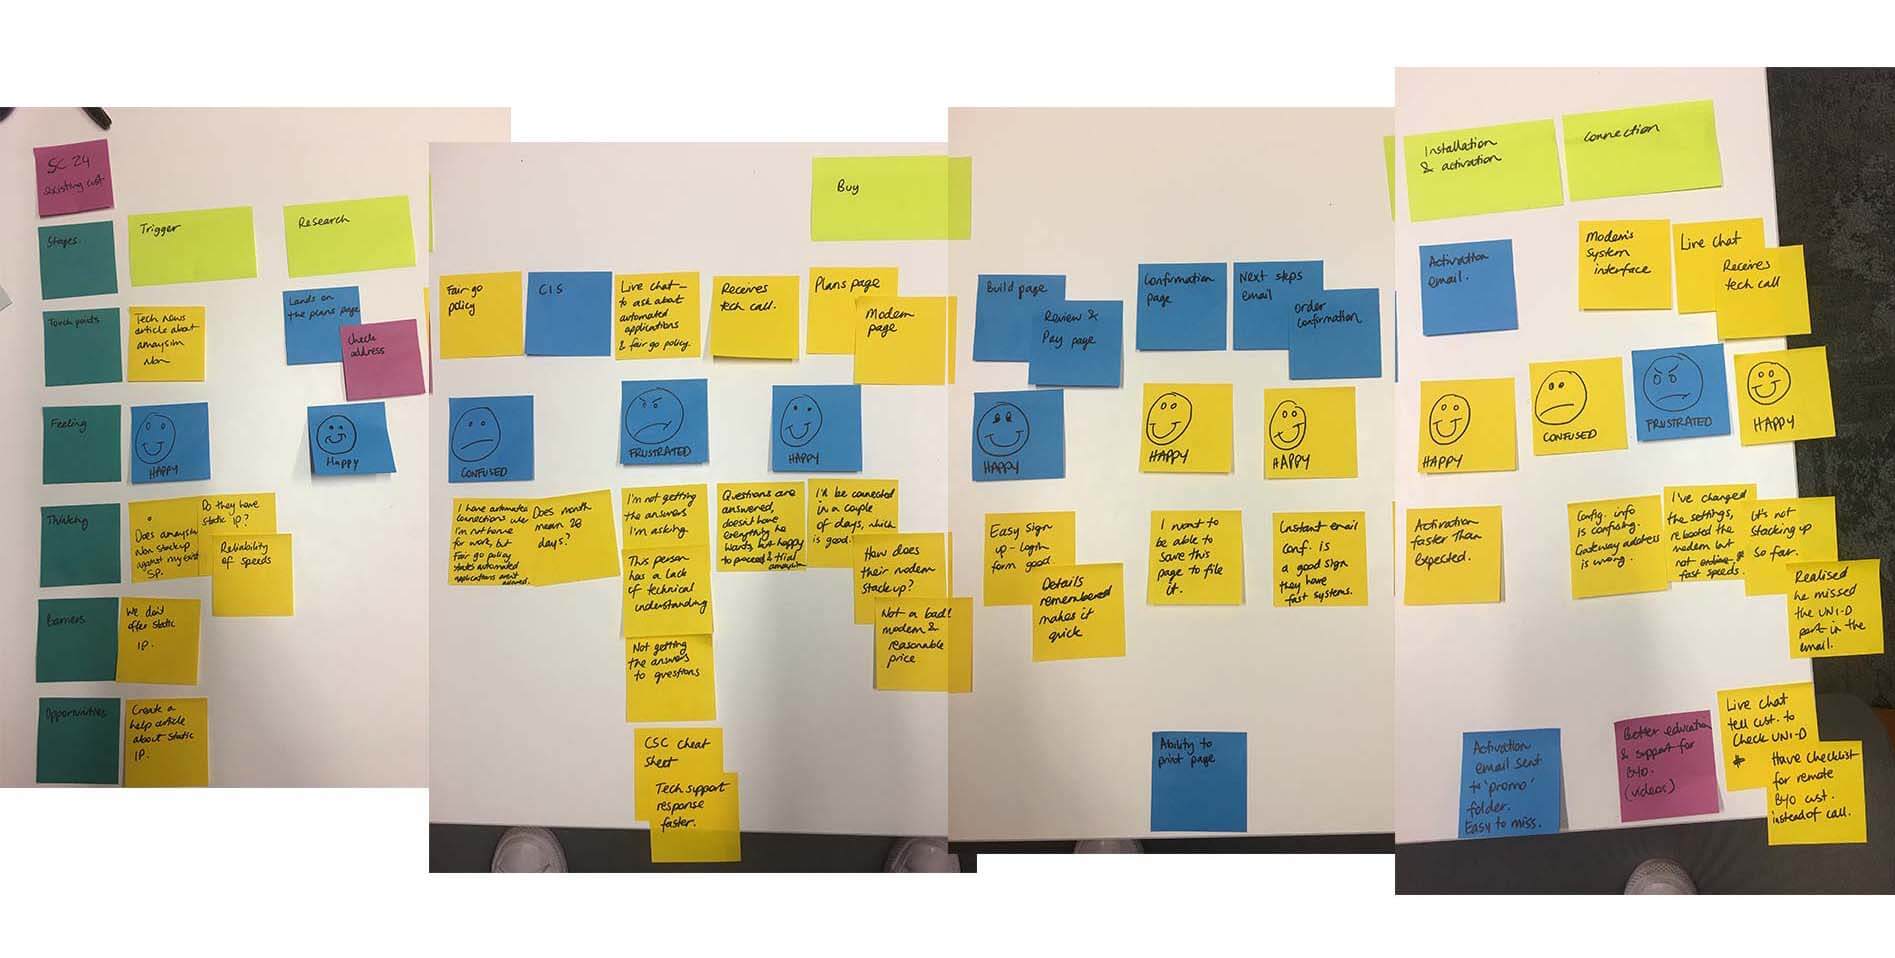 A photo of post it notes showing our notes to create the tech life journey map